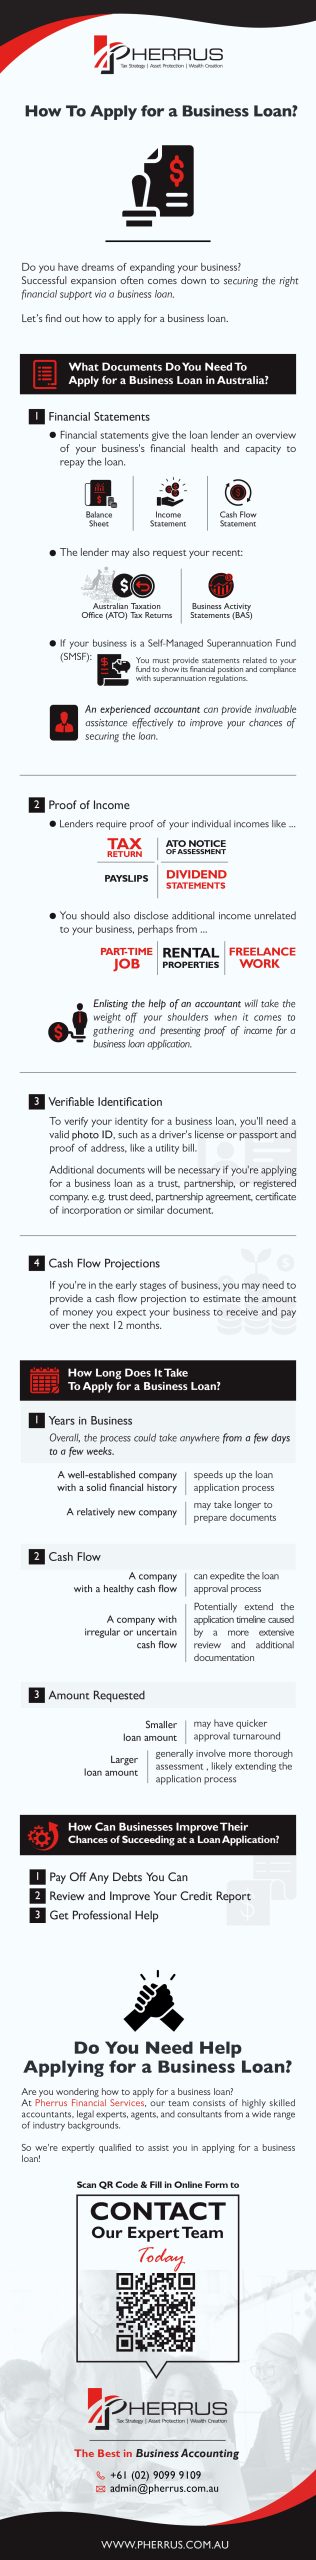 How To Apply for a Business Loan Infographic